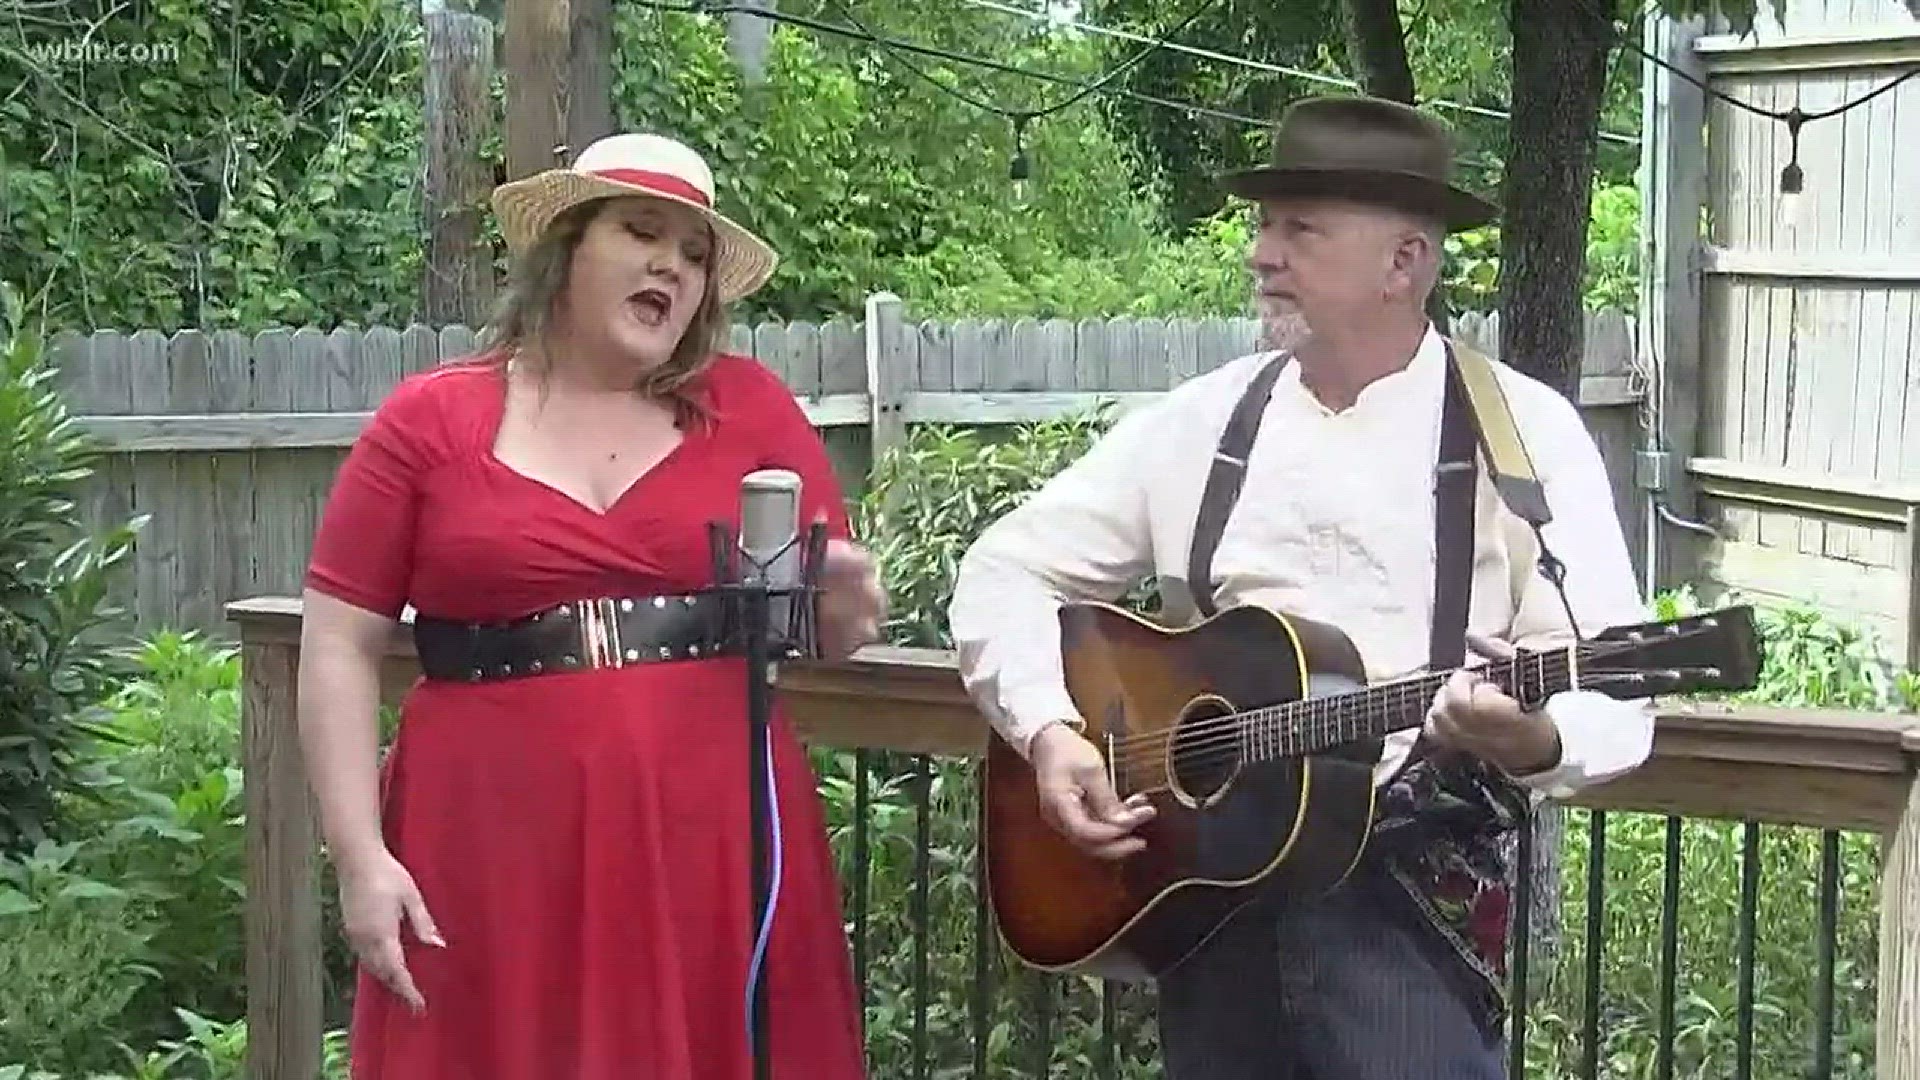 Smoky Mountain Tunes & Tales in Gatlinburg runs June 22 to August 11Daily Performances: 6 to 11pmLearn more at gatlinburg.com/events  June 20, 2018-4pm